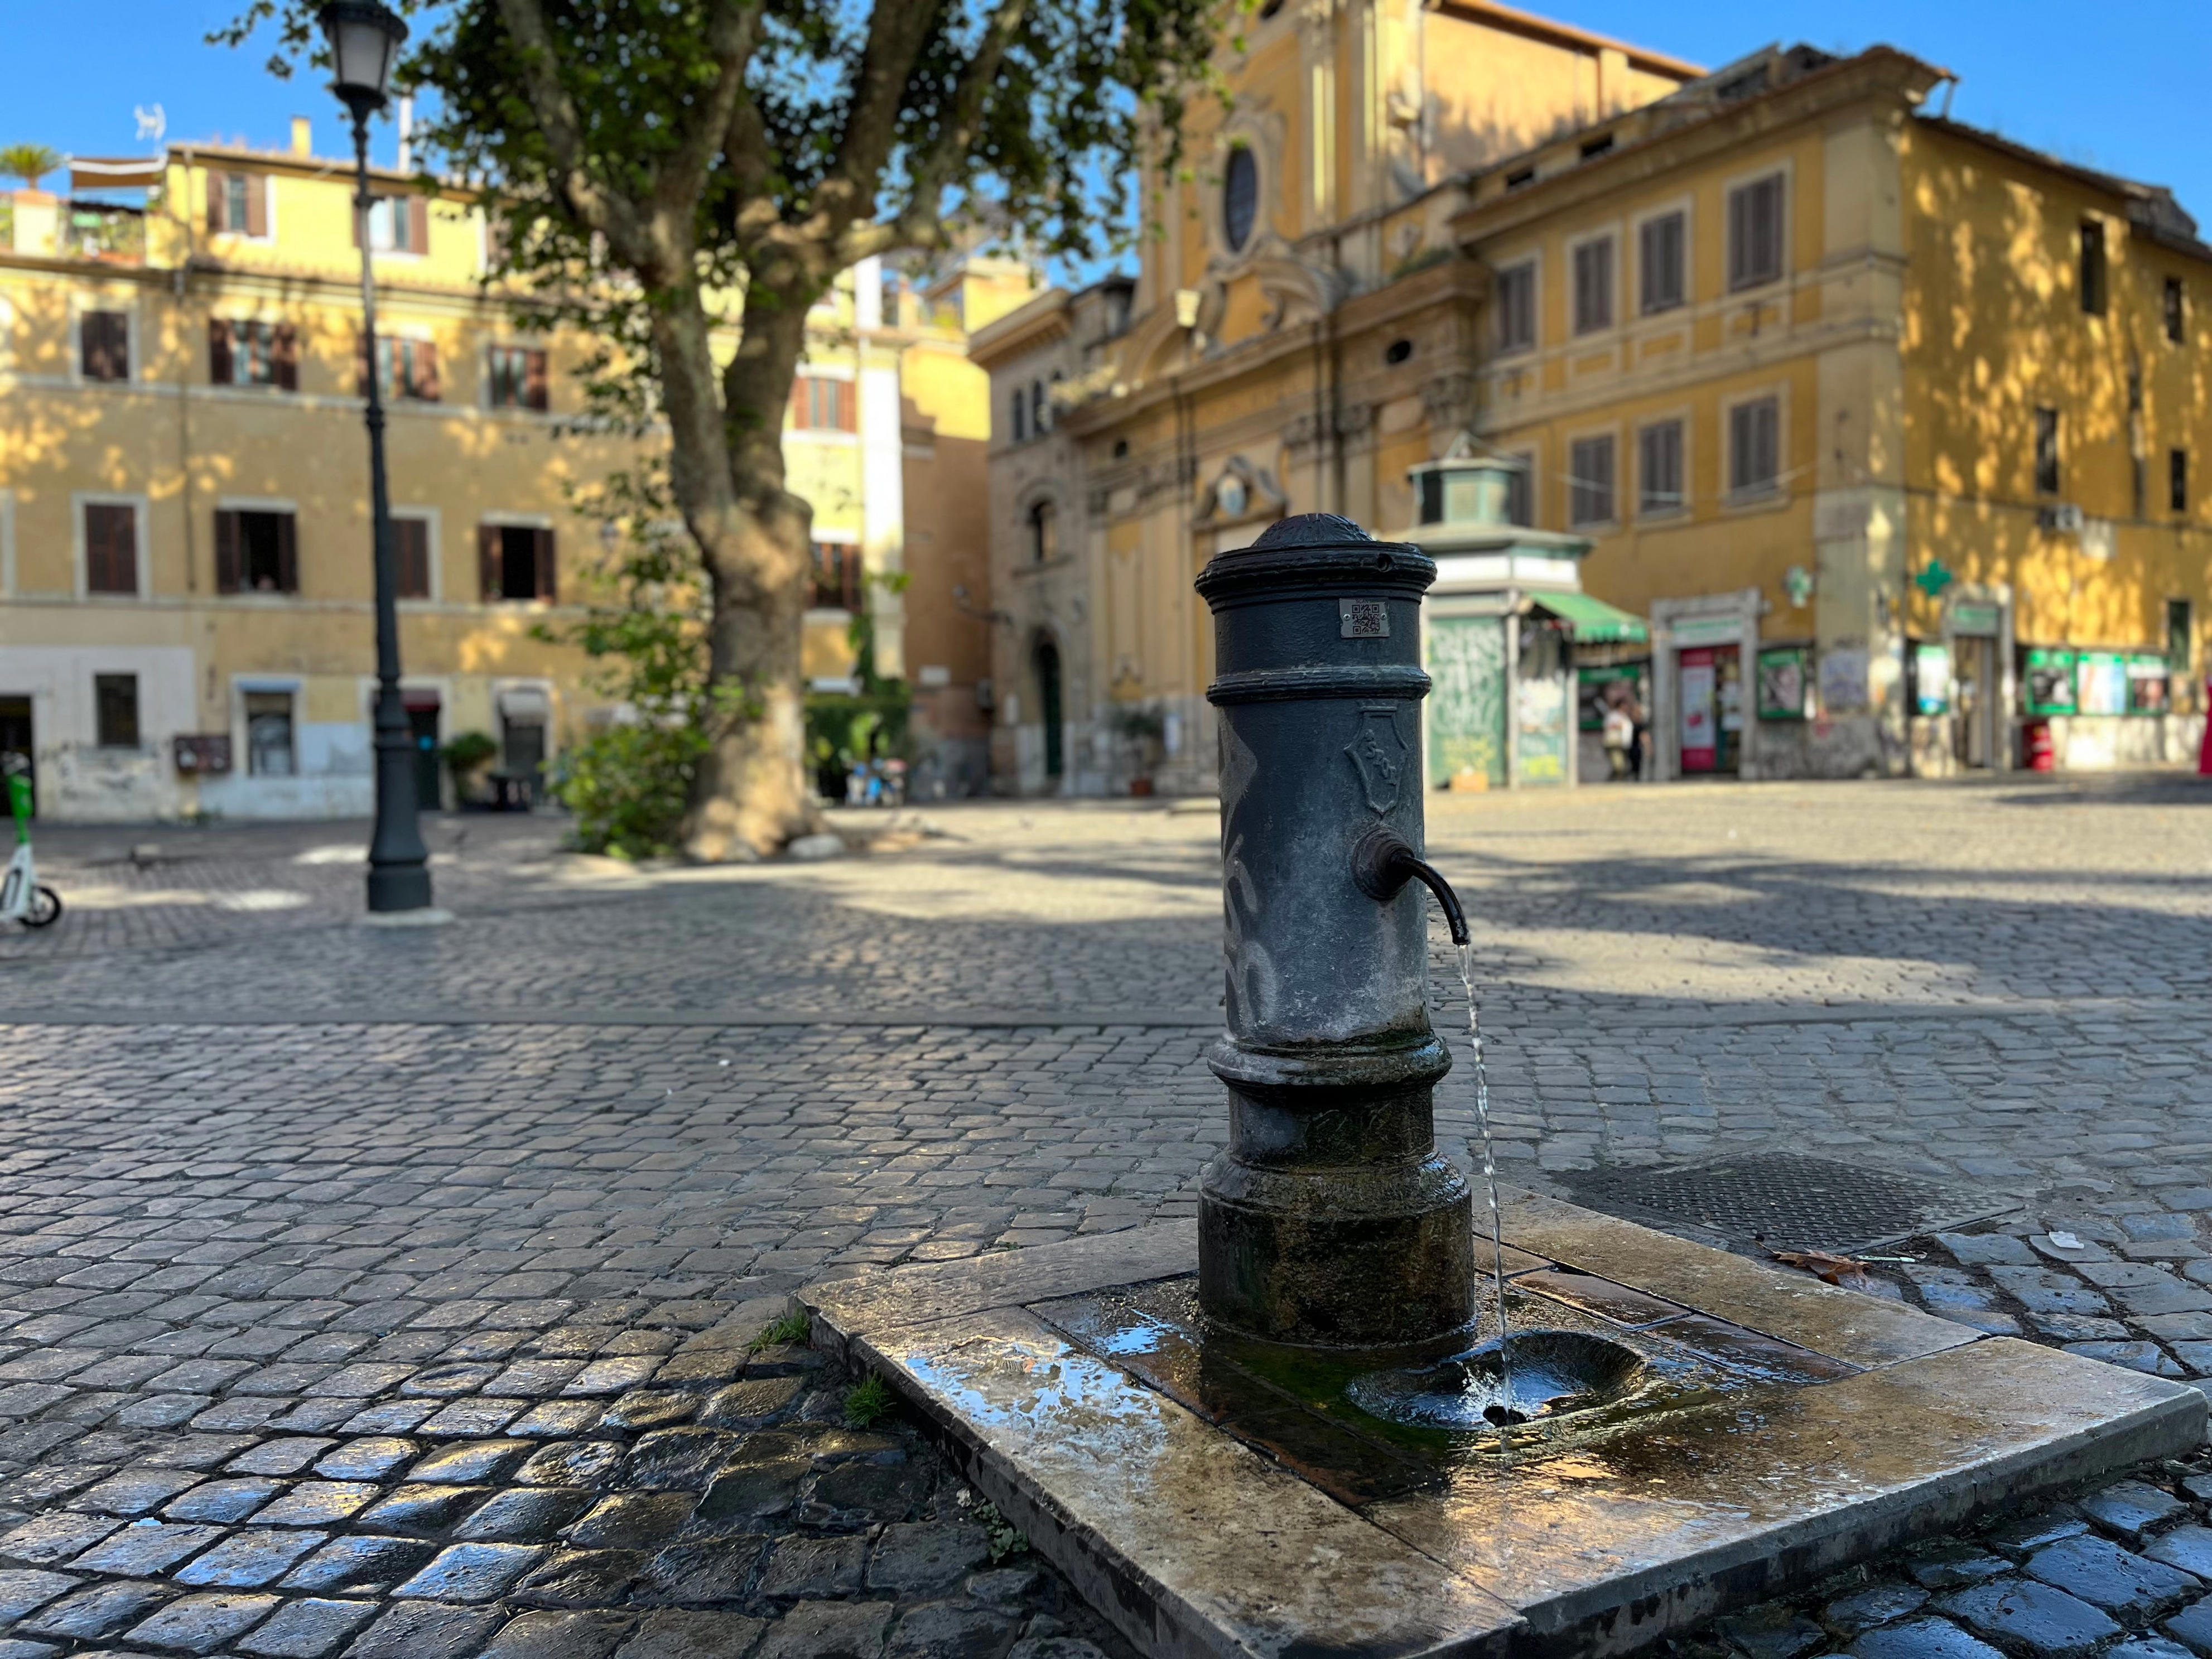 <p>Speaking of trash, stop purchasing plastic water bottles when you visit. Drinking fountains are very common in Italy and, some cities here even <a href="https://www.forbes.com/sites/rebeccahughes/2022/09/02/venice-urges-tourists-to-ditch-plastic-water-bottles-and-use-drinking-fountains/?sh=1f4e148f2e20" rel="noopener">highly encourage tourists to drink from them</a>.</p><p>In Rome alone, there are <a href="https://archive.nytimes.com/intransit.blogs.nytimes.com/2009/10/14/in-rome-an-easier-way-to-quench-thirst/#:~:text=Few%20things%20come%20free%20in,from%20the%20city's%202500%20fountains." rel="noopener">2,500 drinking fountains</a> called nasoni<em>. </em>These <a href="https://italoamericano.org/nasoni-and-street-fountains/" rel="noopener">historic fixtures</a> are oftentimes serving the same water that flows through the tap in nearby houses and hotels.</p><p>I suggest carrying a reusable water bottle and refilling it at every nasone. It's free!</p><p>If you're sightseeing anywhere in Italy and get thirsty but there is no fountain in sight, open Waidy, a free phone app that can direct you to the fountains nearest you. </p>